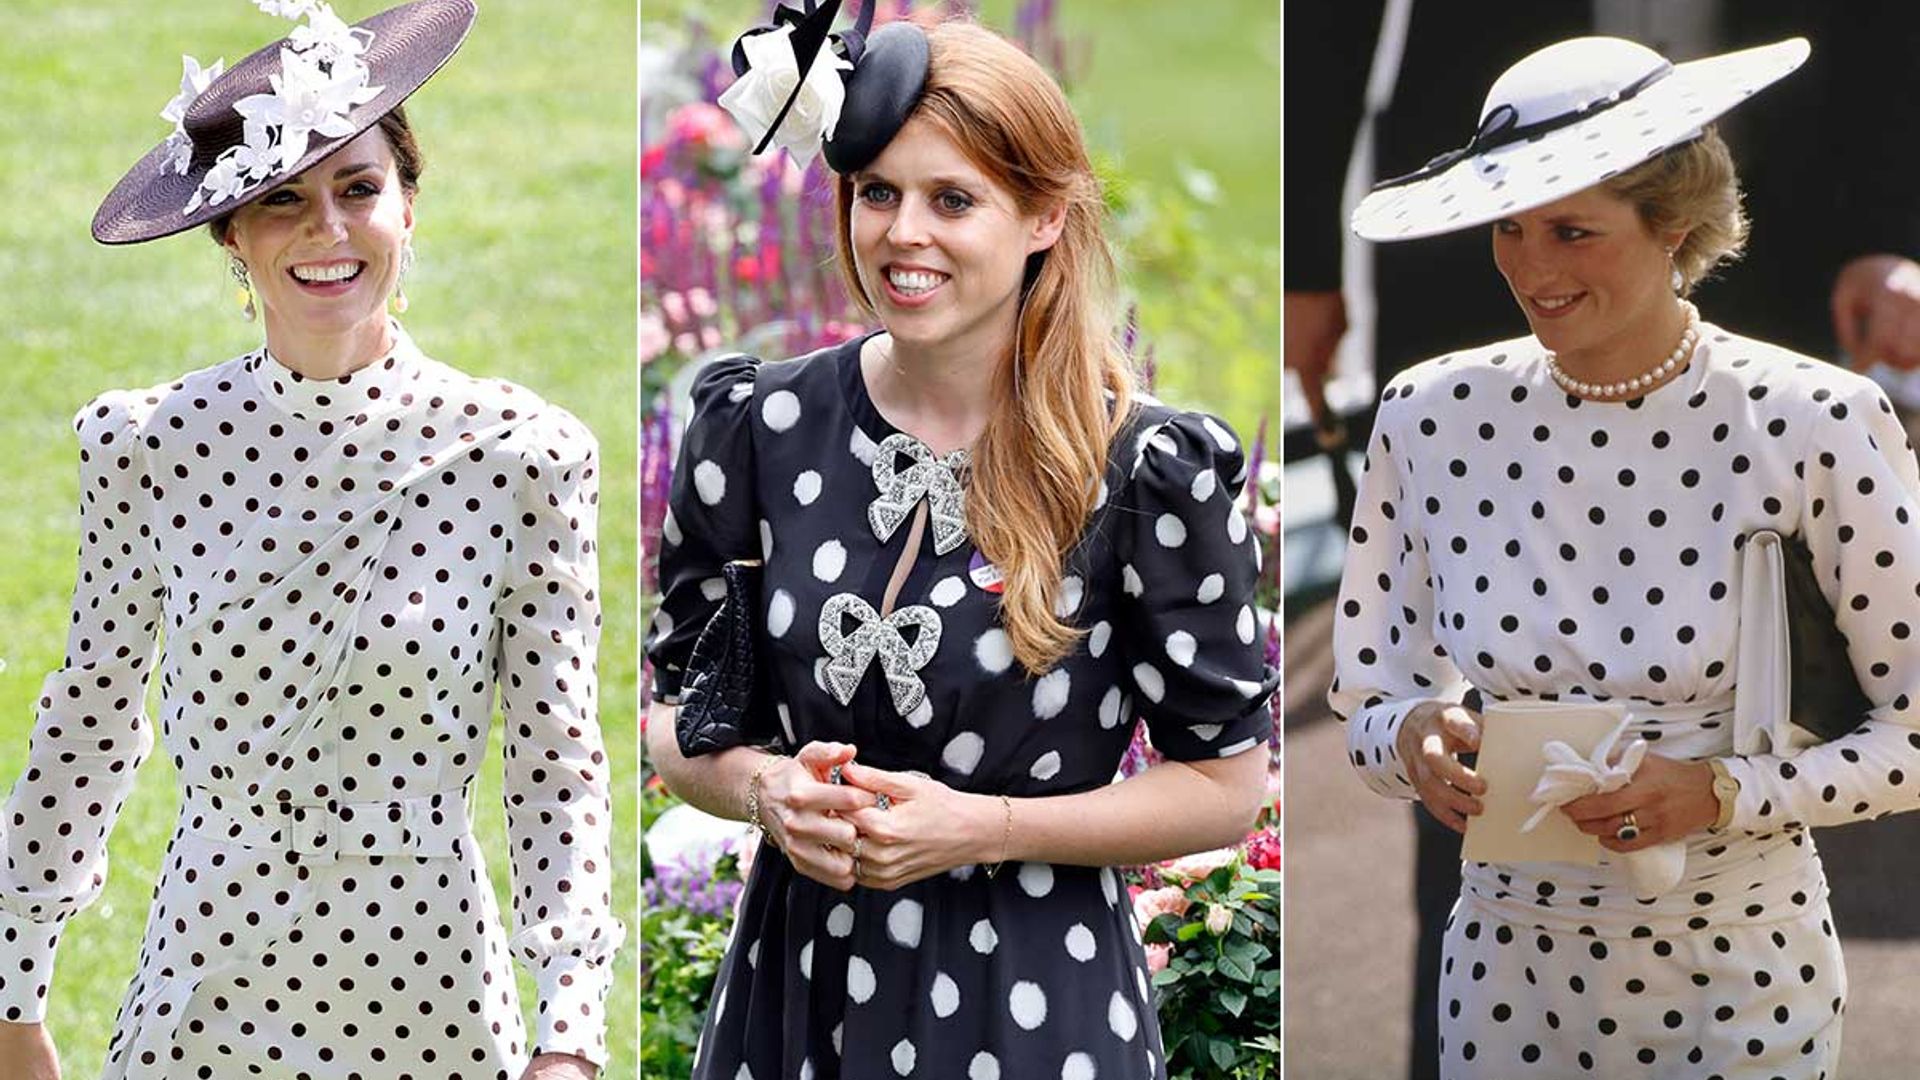 Royal ladies in polka dots: Kate Middleton, Princess Diana and more in this summer’s hottest trend